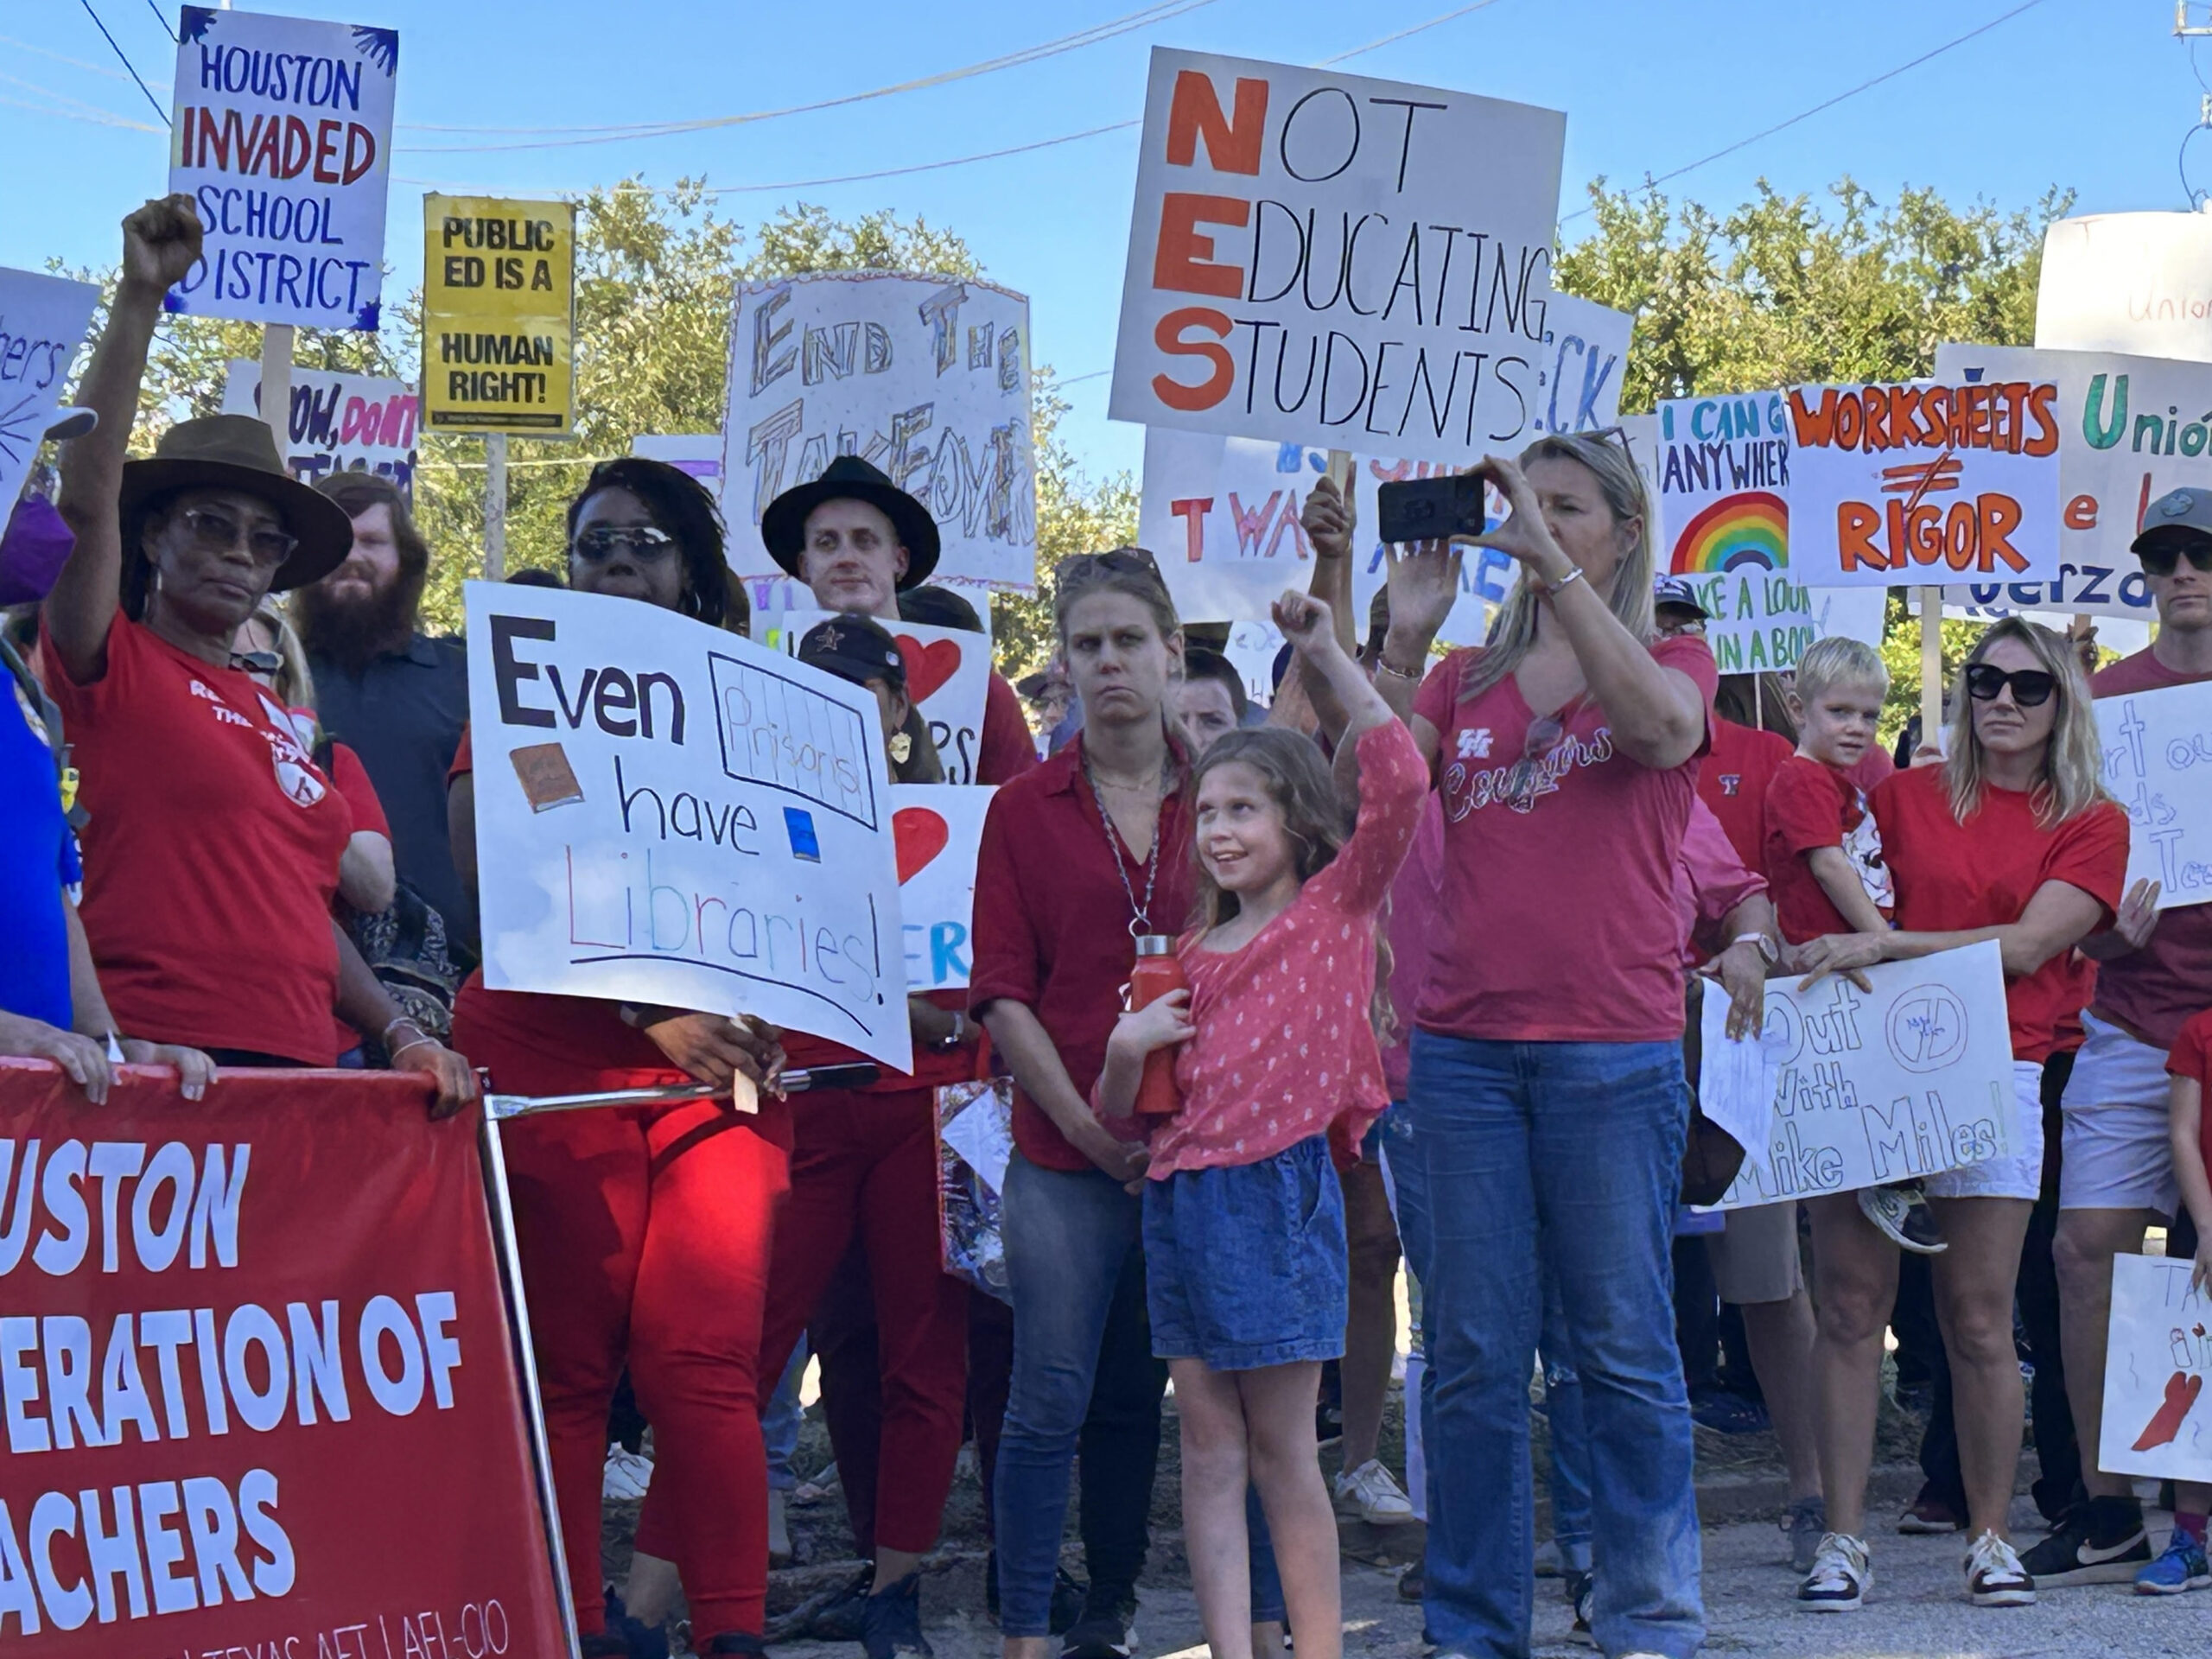 A diverse crowd poses during a protest press conference, many in red t-shirts or holding signs opposing the state takeover of Houston ISD by Mike Miles.